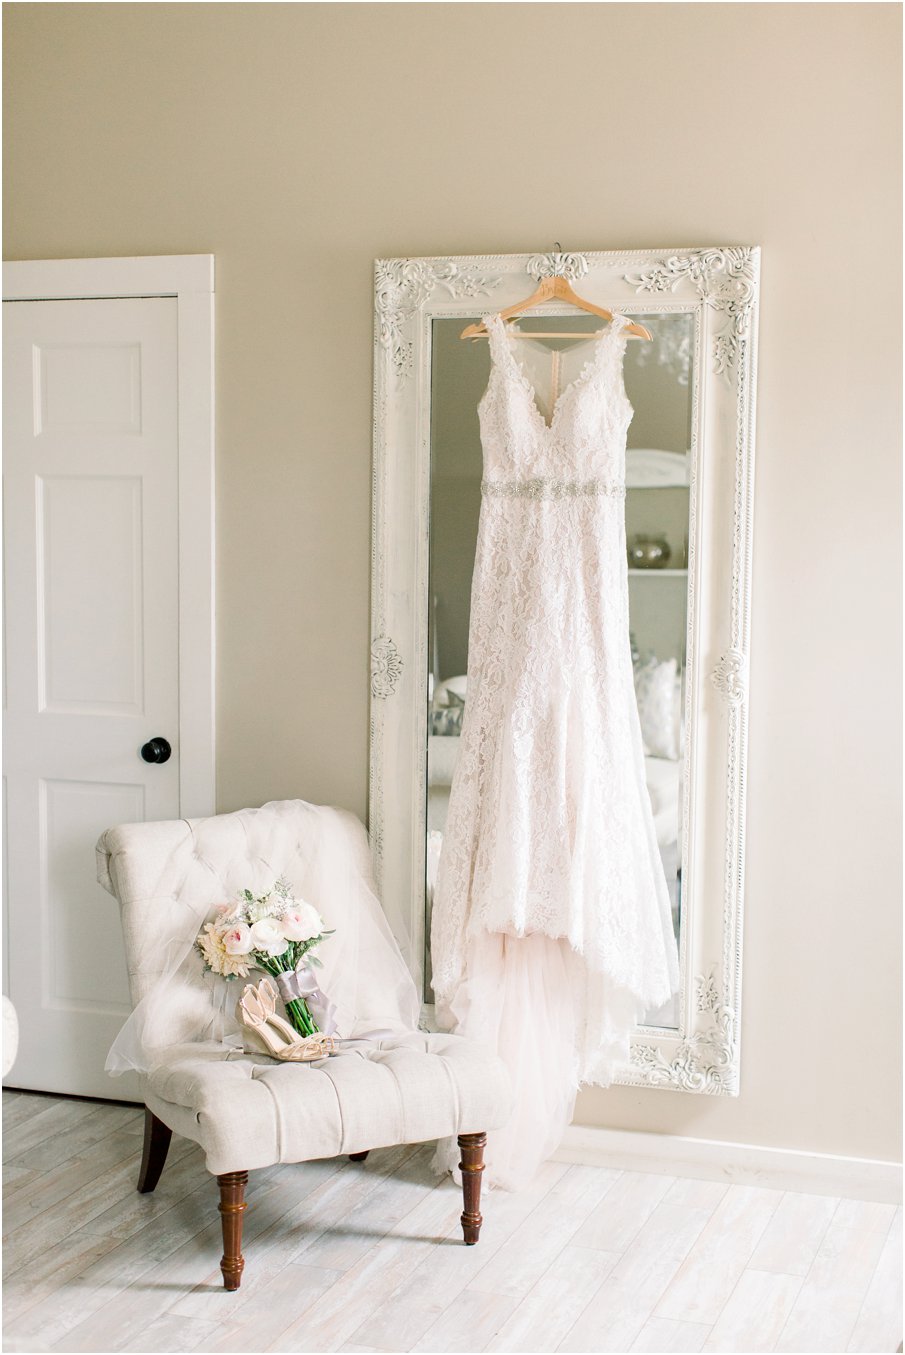 This Northern Virginia wedding venue has the most beautiful getting ready suite with white walls and furniture. Perfect for getting ready details. Shadow Creek weddings are perfect for every moment.